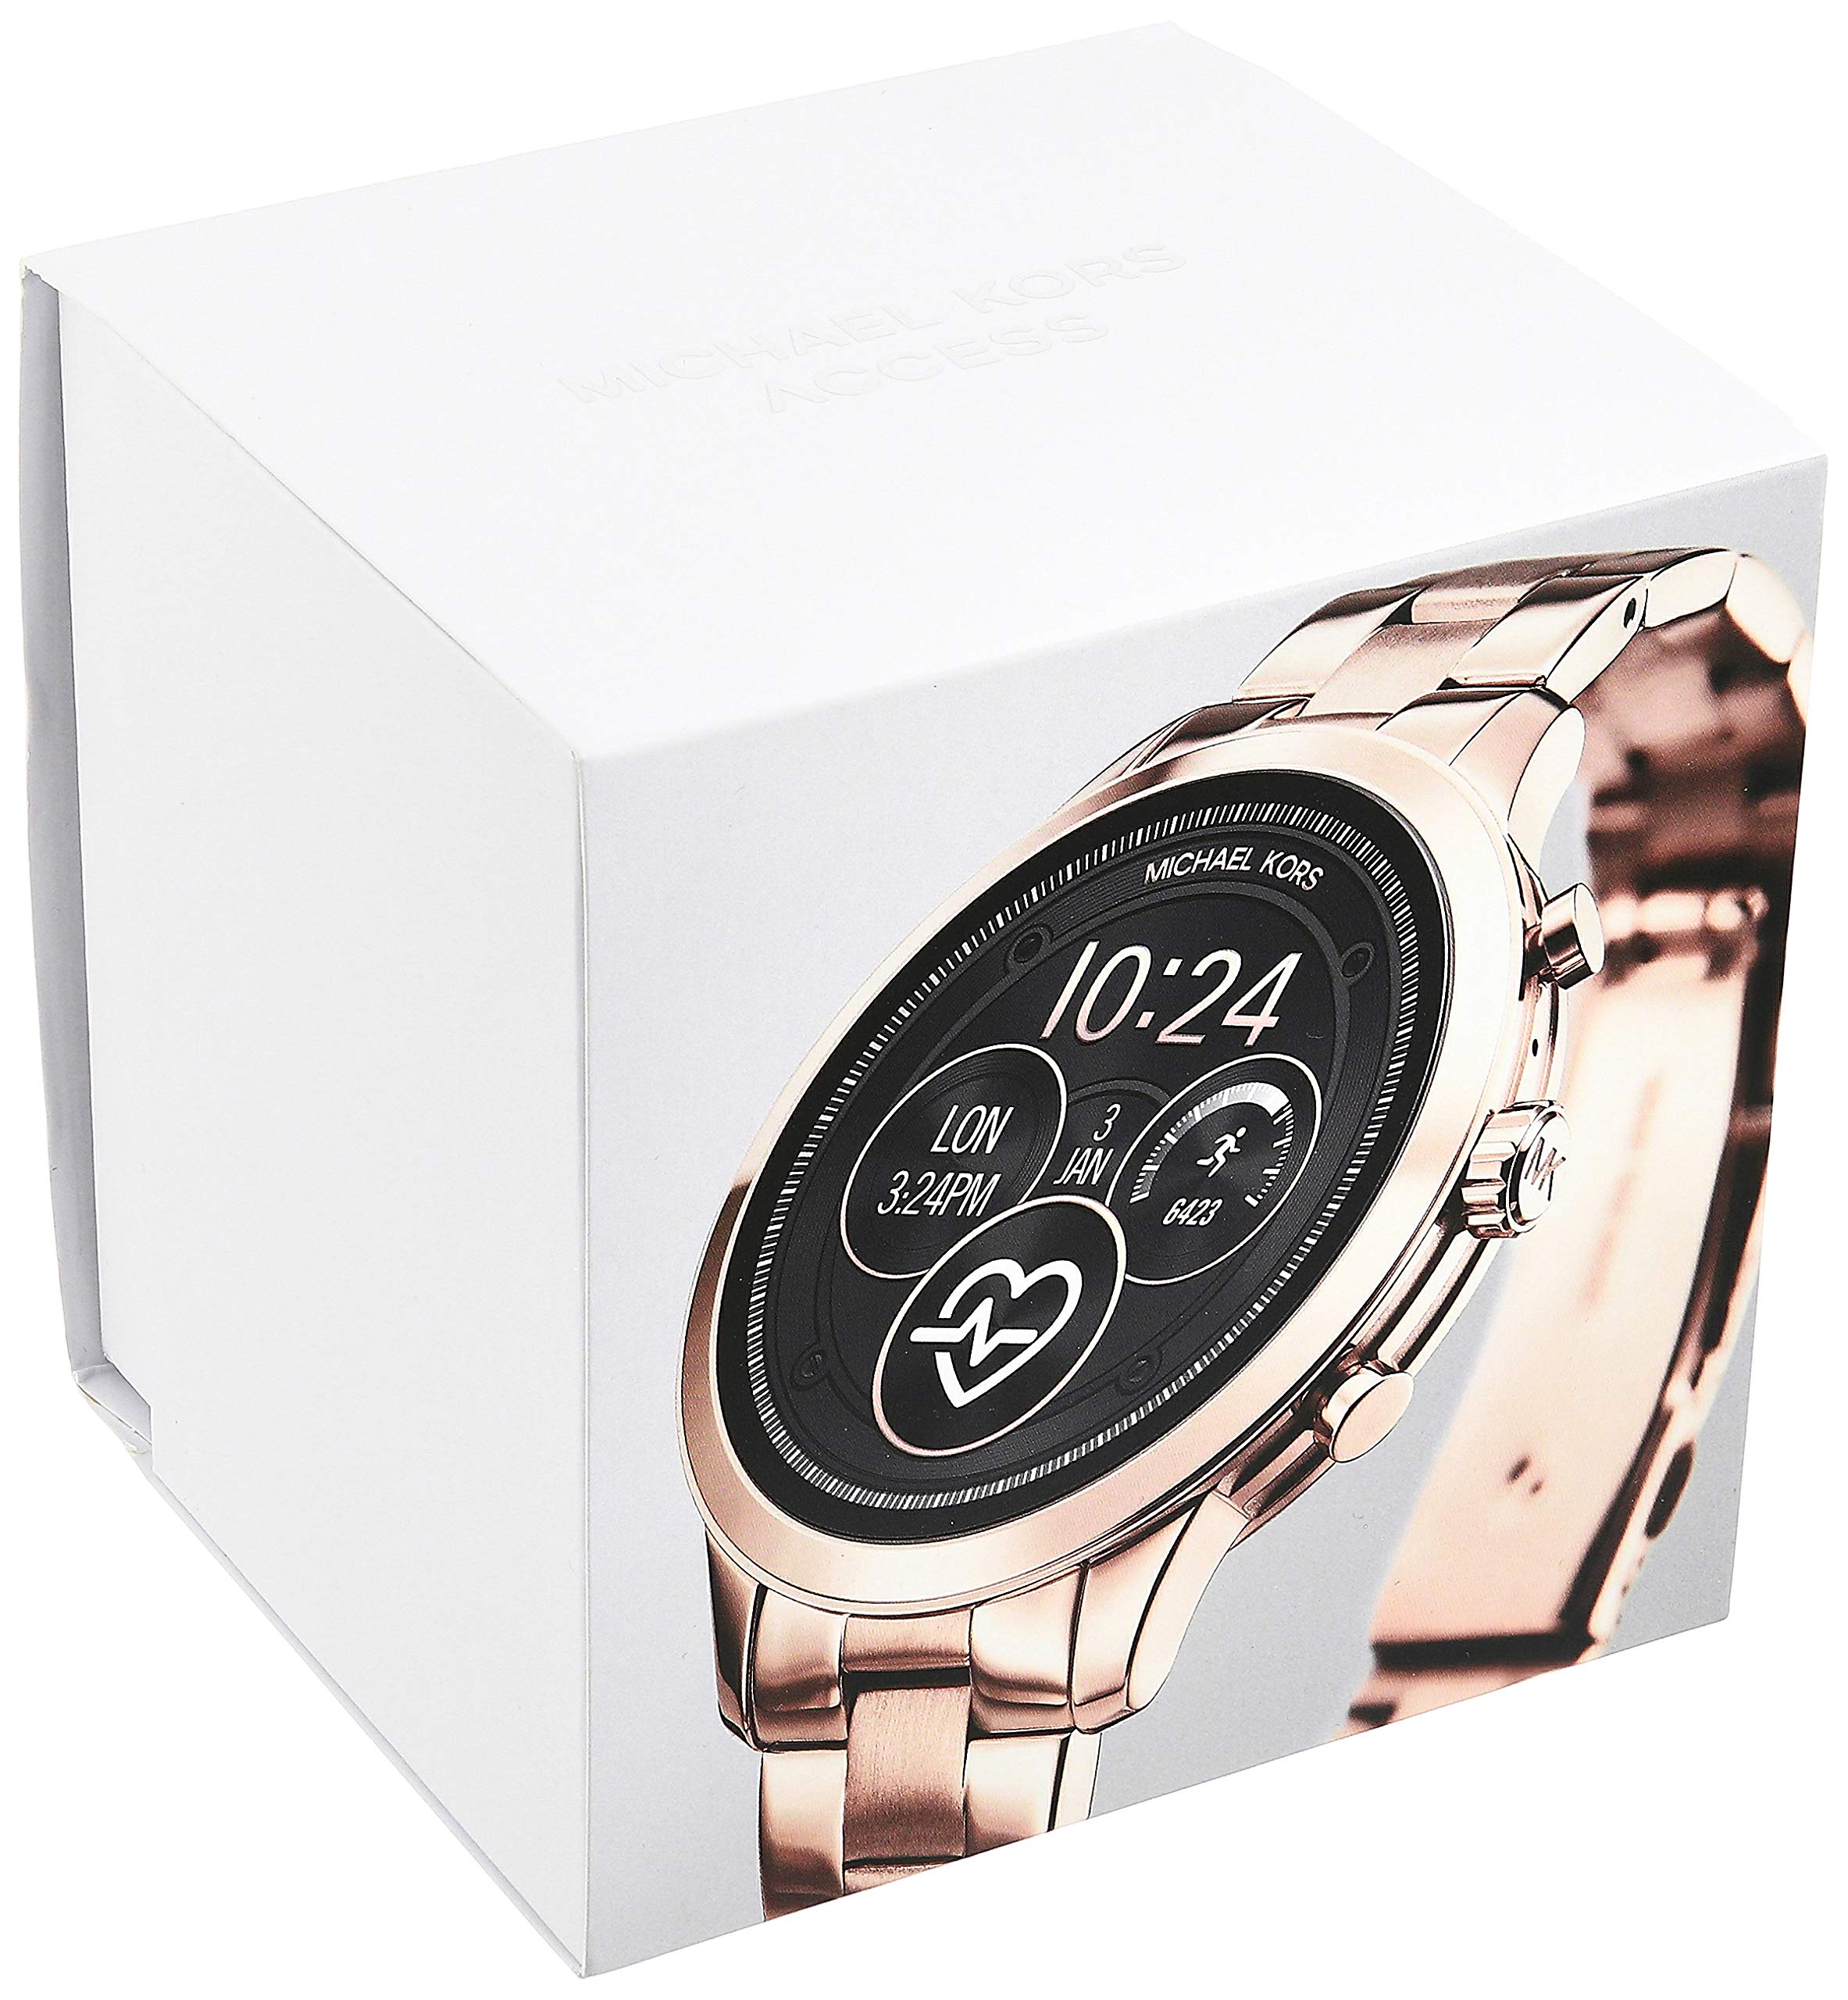 MICHAEL KORS SOFIE ROSE ACCESS GEN 4 DISPLAYGOLD LADIES SMARTWATCH   WATCHES from Adams Jewellers Limited UK